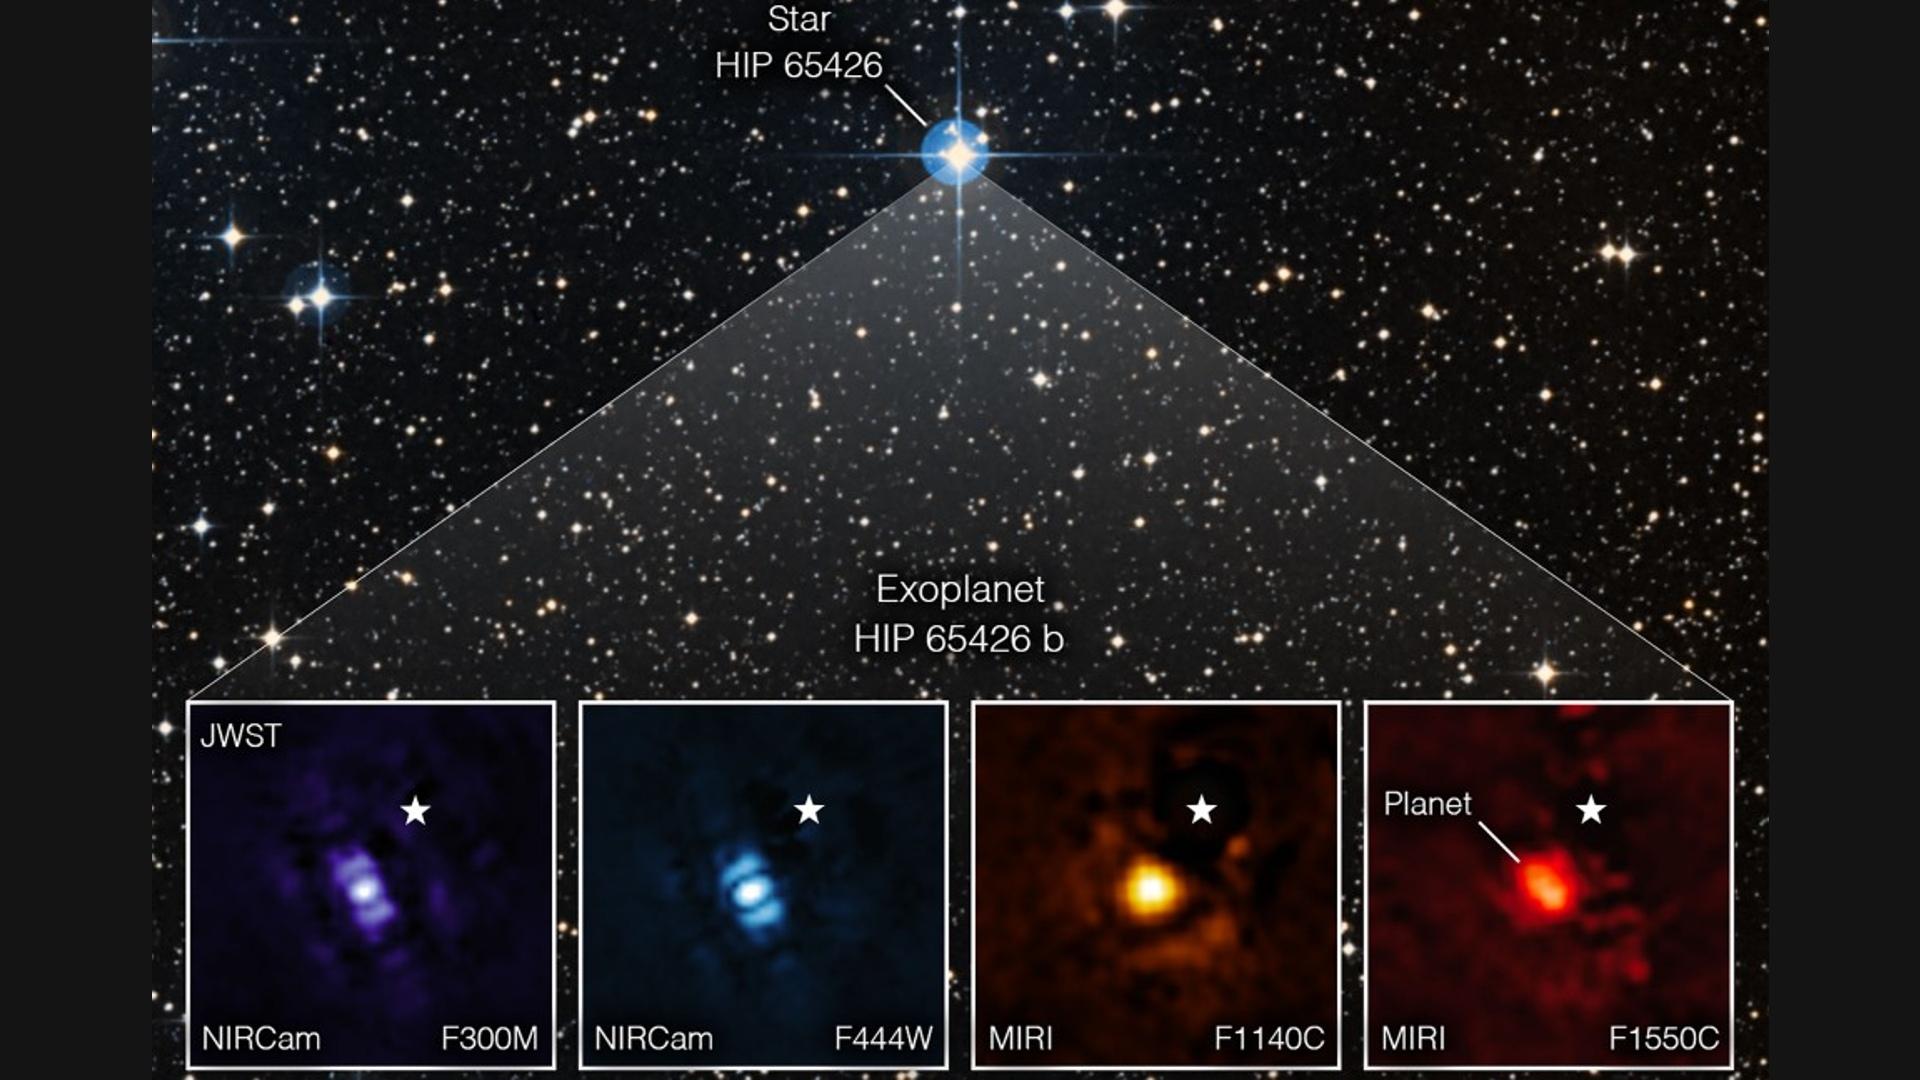 This image shows the exoplanet HIP 65426 b in different bands of infrared light, as seen from the James Webb Space Telescope. Purple shows the NIRCam instrument’s view at 3 micrometers, blue shows the NIRCam instrument’s view at 4.44 micrometers, yellow shows the MIRI instrument’s view at 11.4 micrometers and red shows the MIRI instrument’s view at 15.5 micrometers. (Credit: NASA/ESA/CSA, A Carter (UCSC), the ERS 1386 team and A. Pagan)